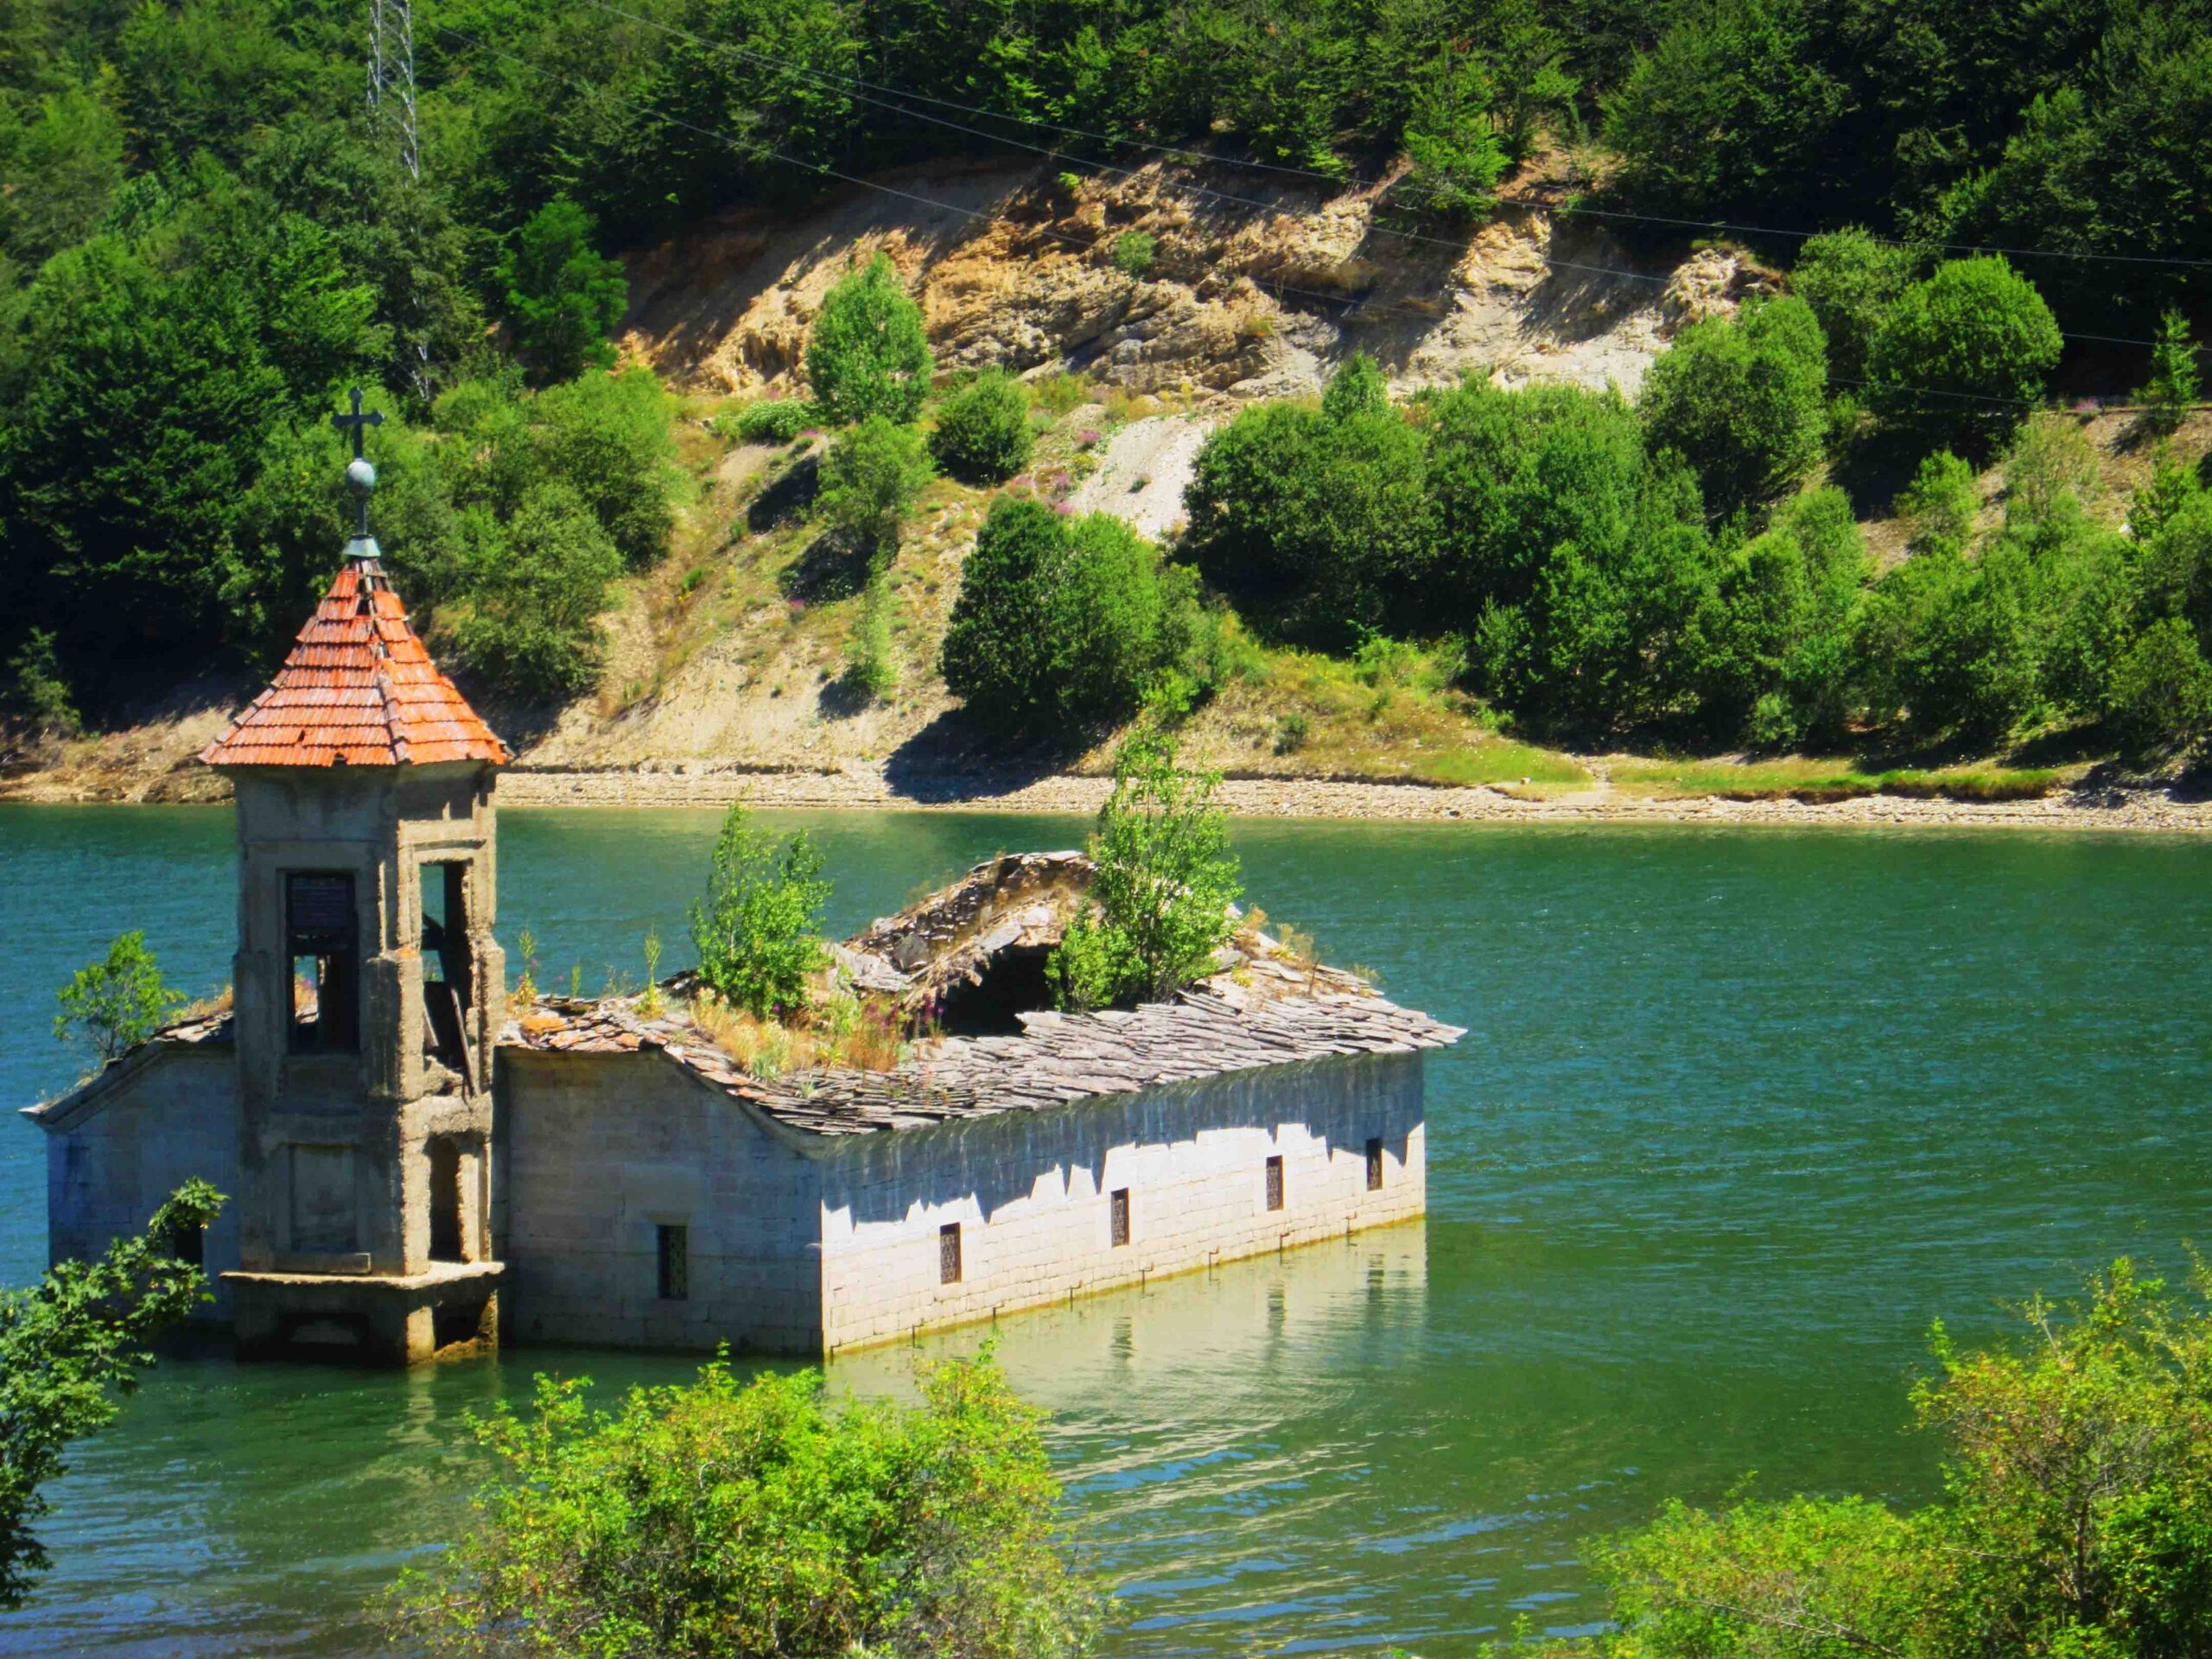 a photo of a submerged church in the middle of the lake